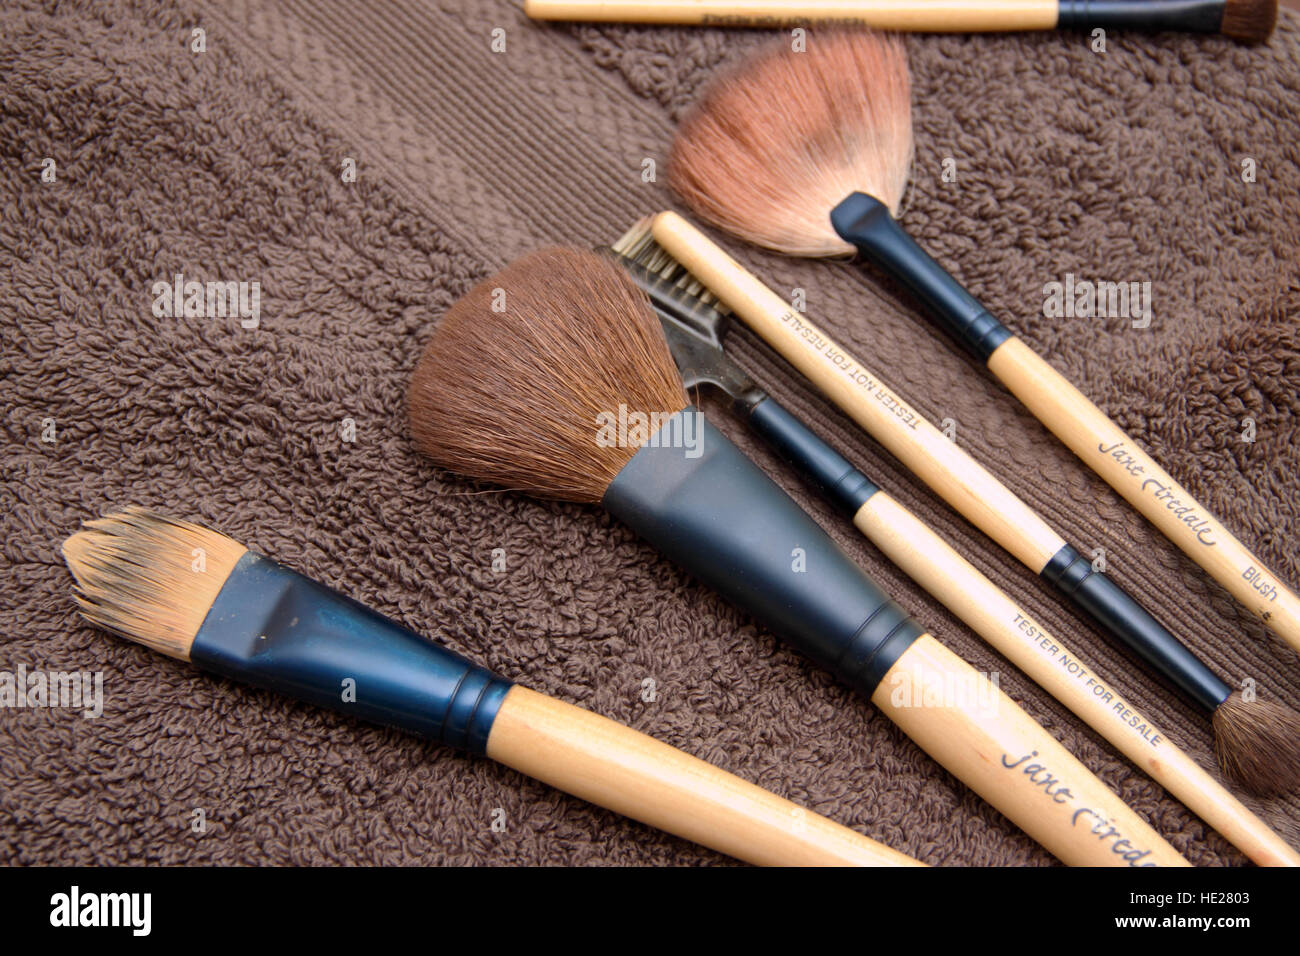 Ladies makeup brushes arranged on a brown towel. Stock Photo